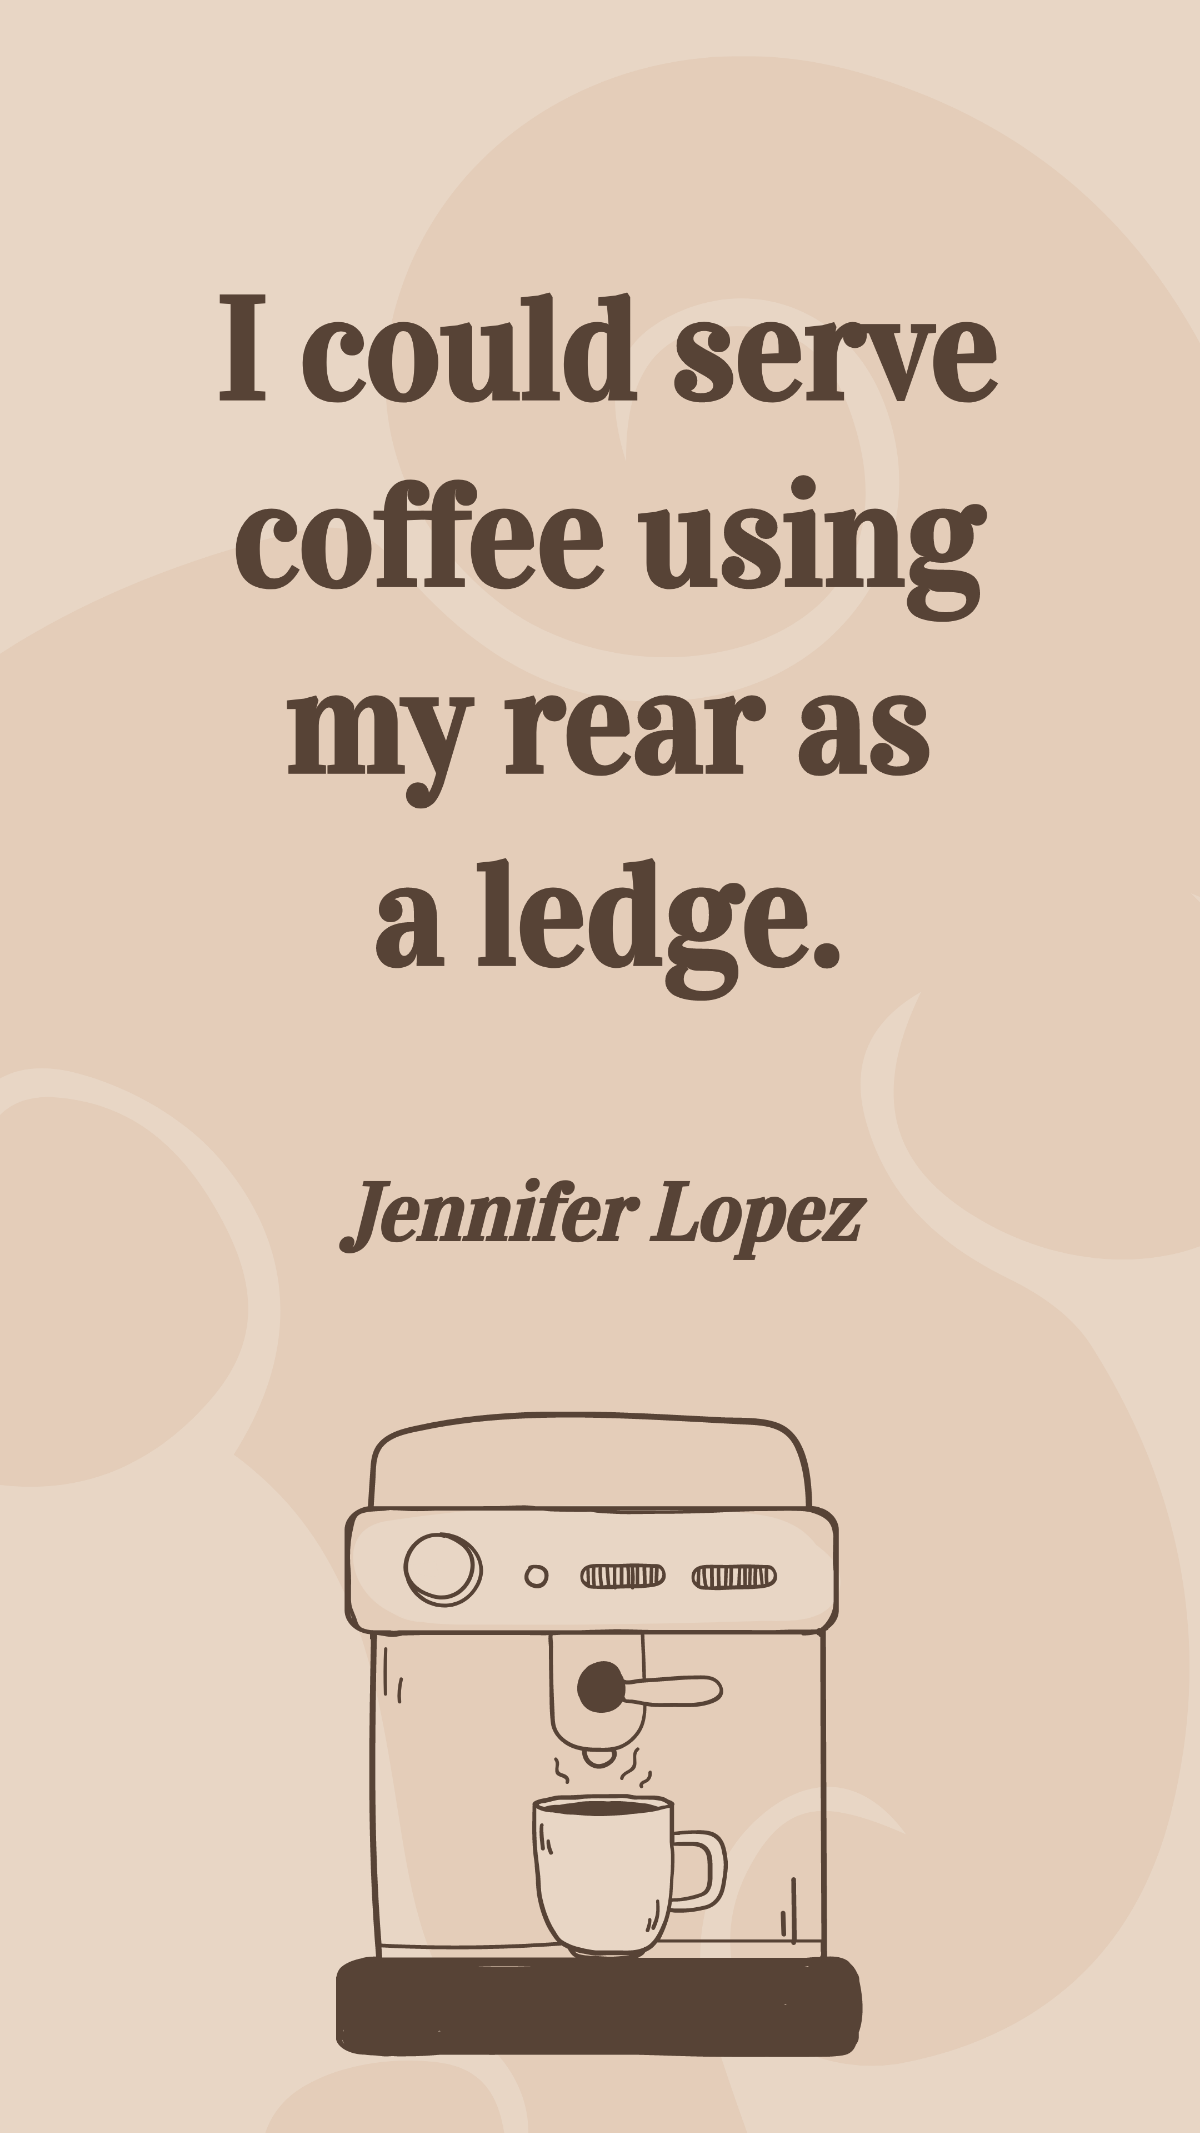 Jennifer Lopez - I could serve coffee using my rear as a ledge. Template